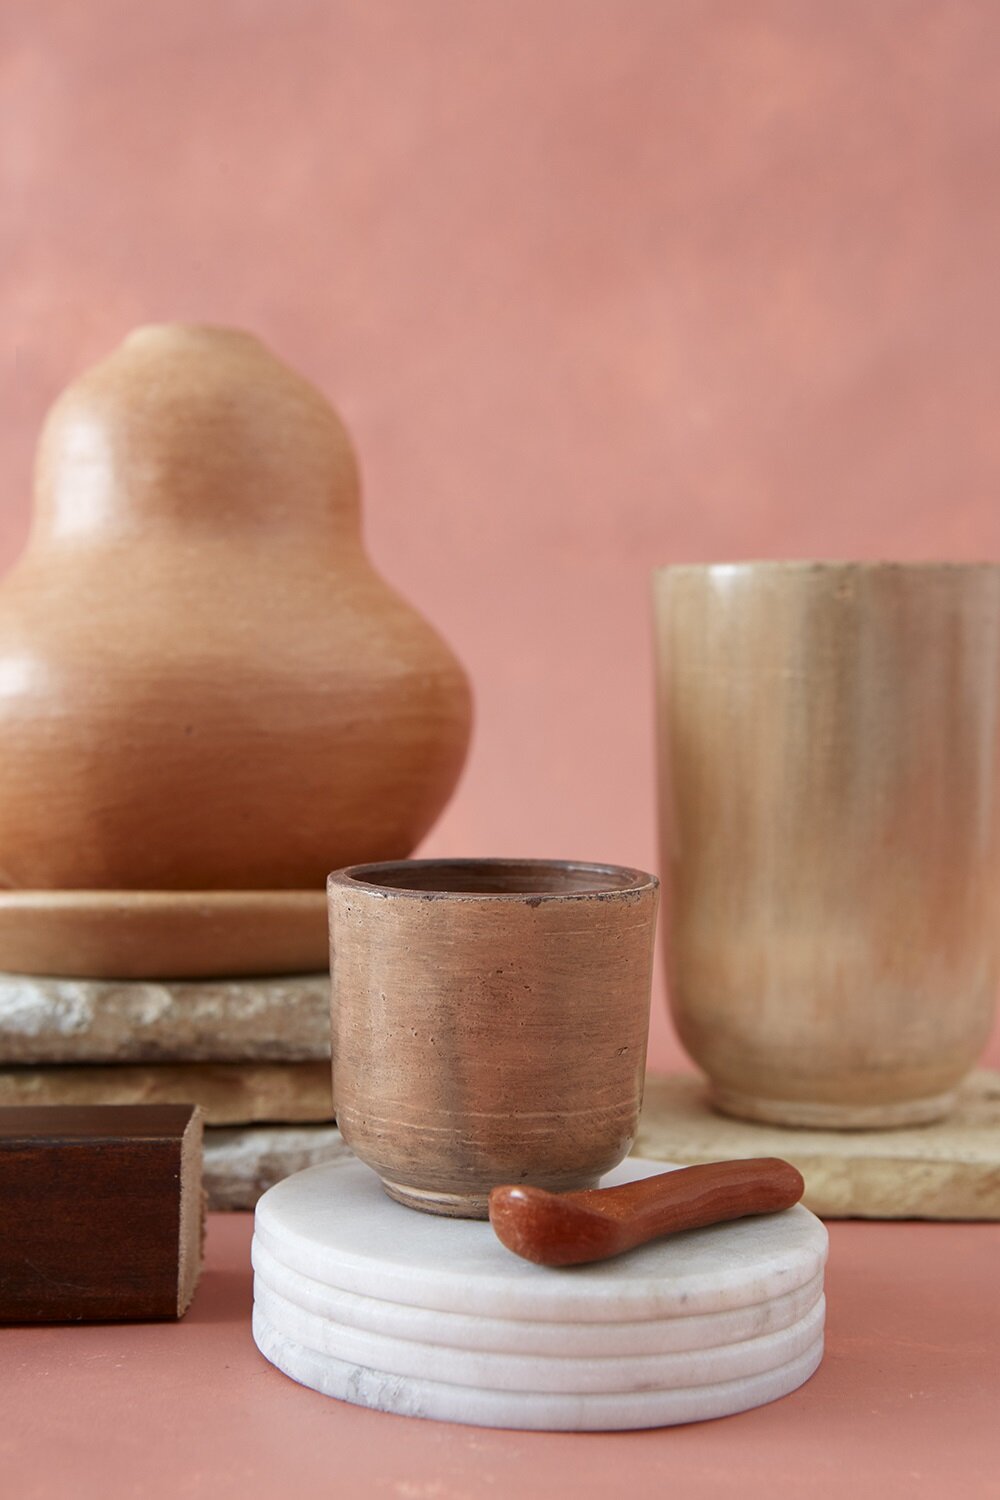 Artisan & Fox - Home Goods - BRUNIDO Burnished Clay Pot and Spoon Set - Handcrafted in Mexico 